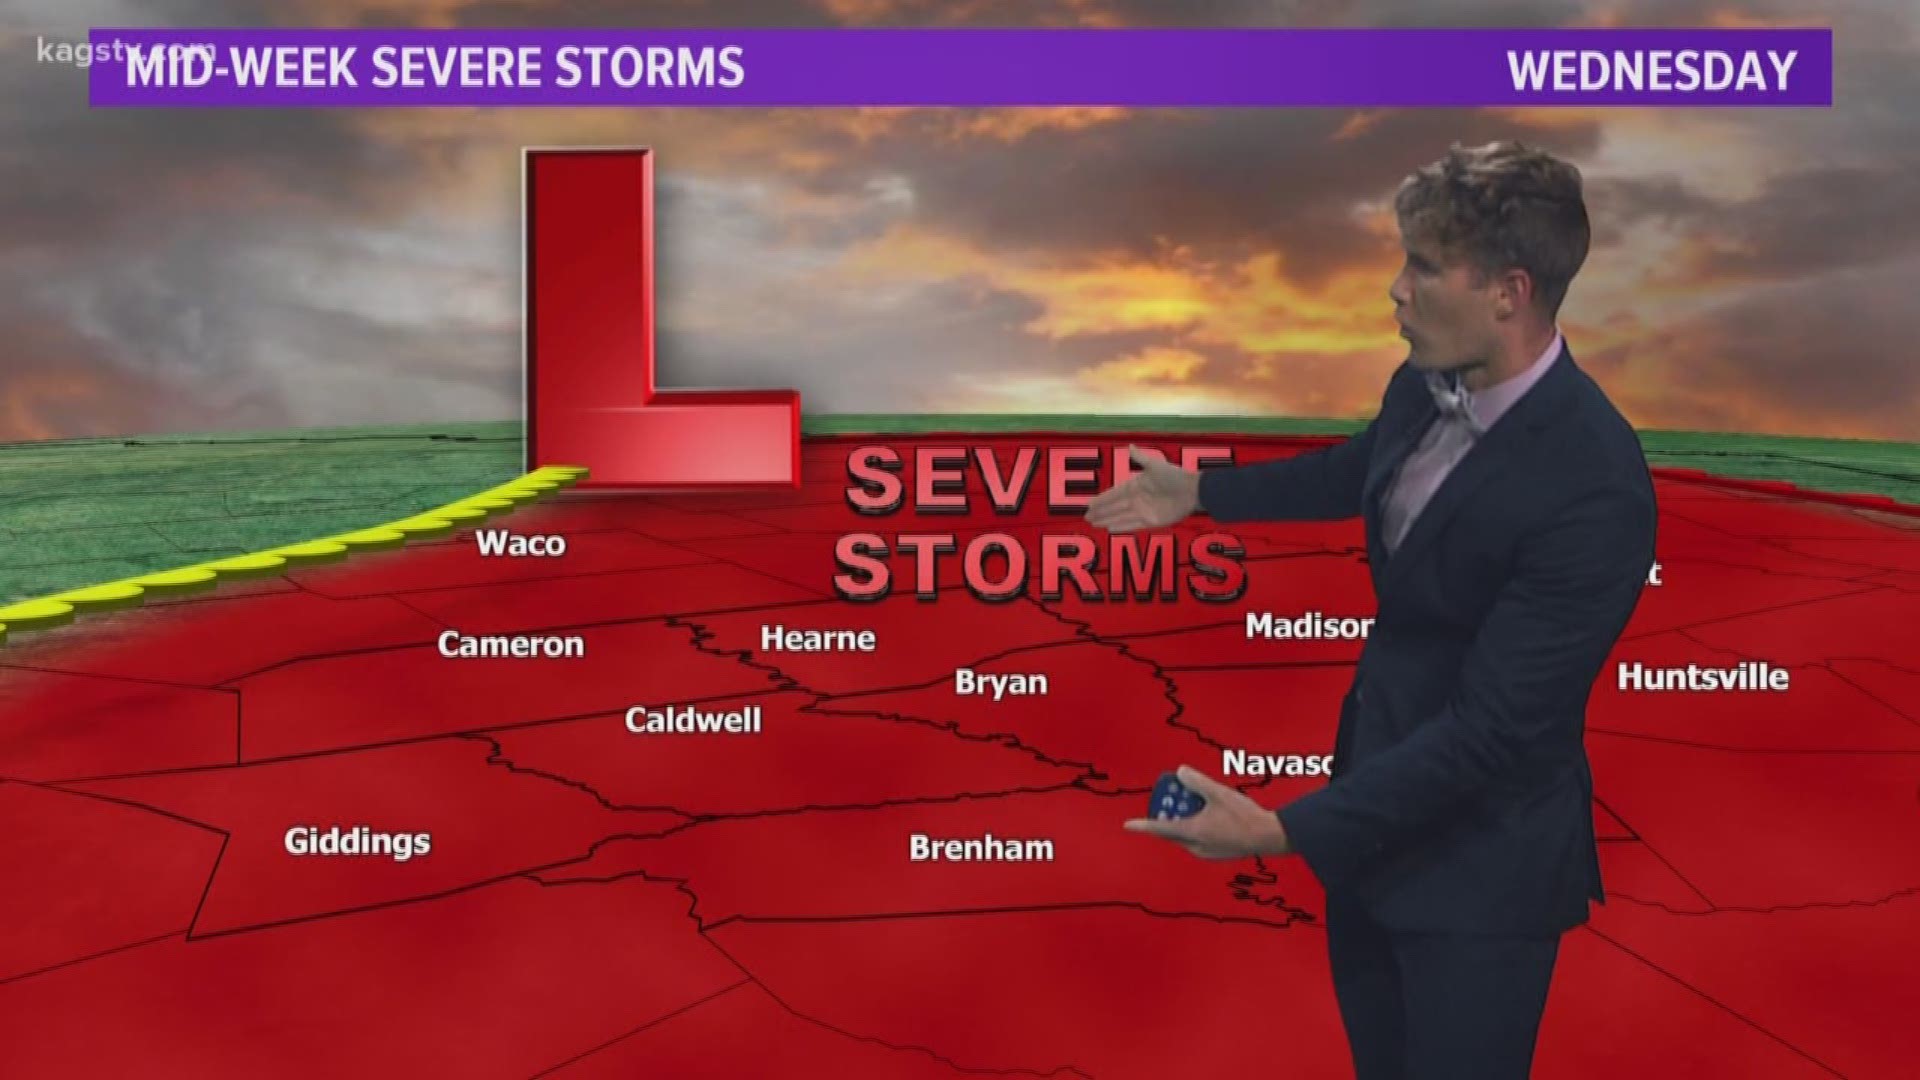 Monday evening video forecast for the Brazos Valley